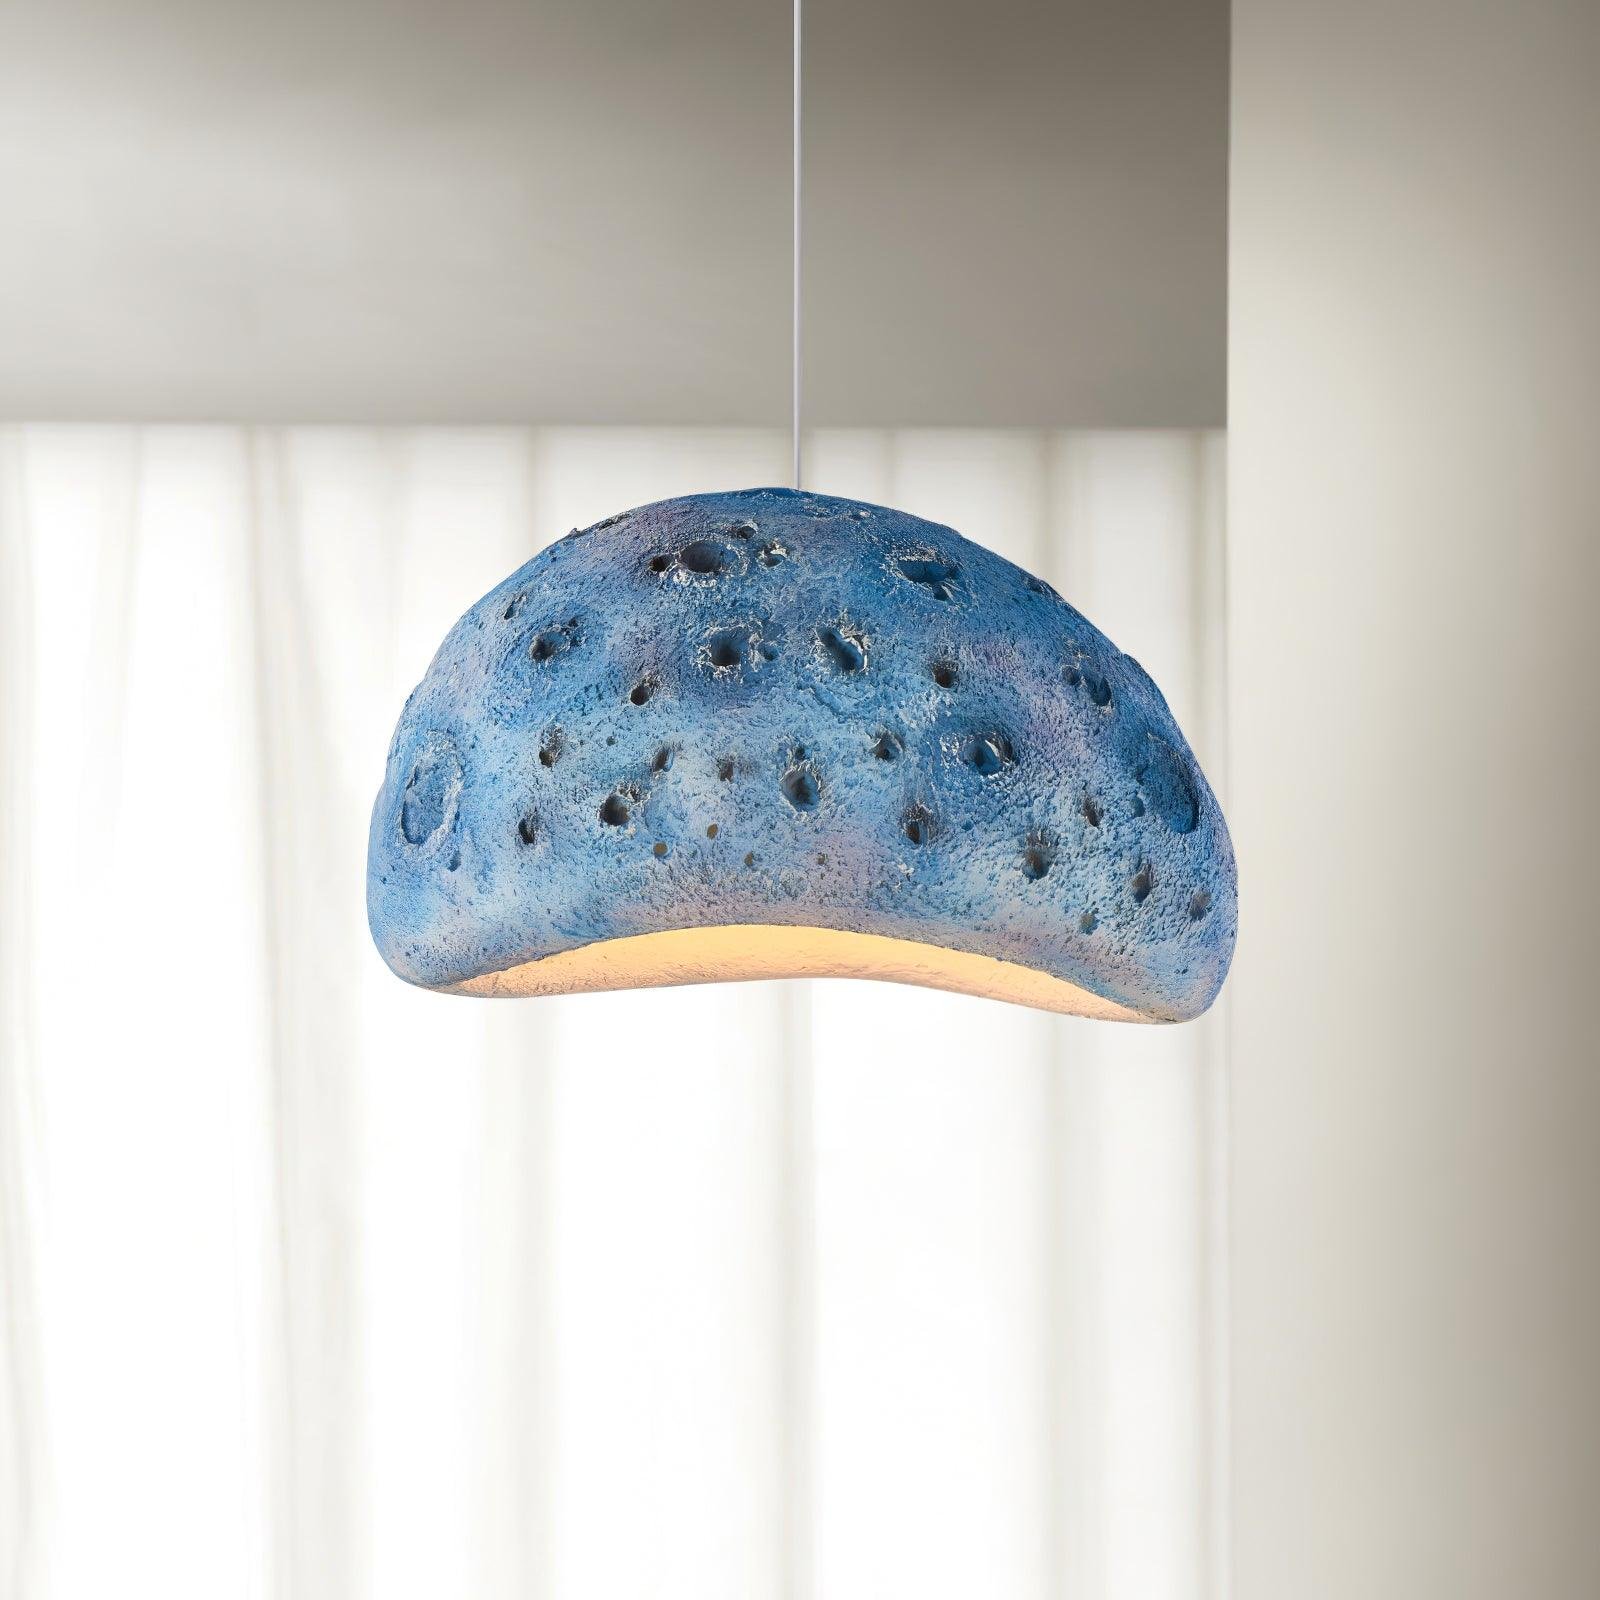 Blue Planet Pendant Lamp in Blue, with a diameter of 15.7 inches and a height of 7.9 inches (40cm x 20cm).